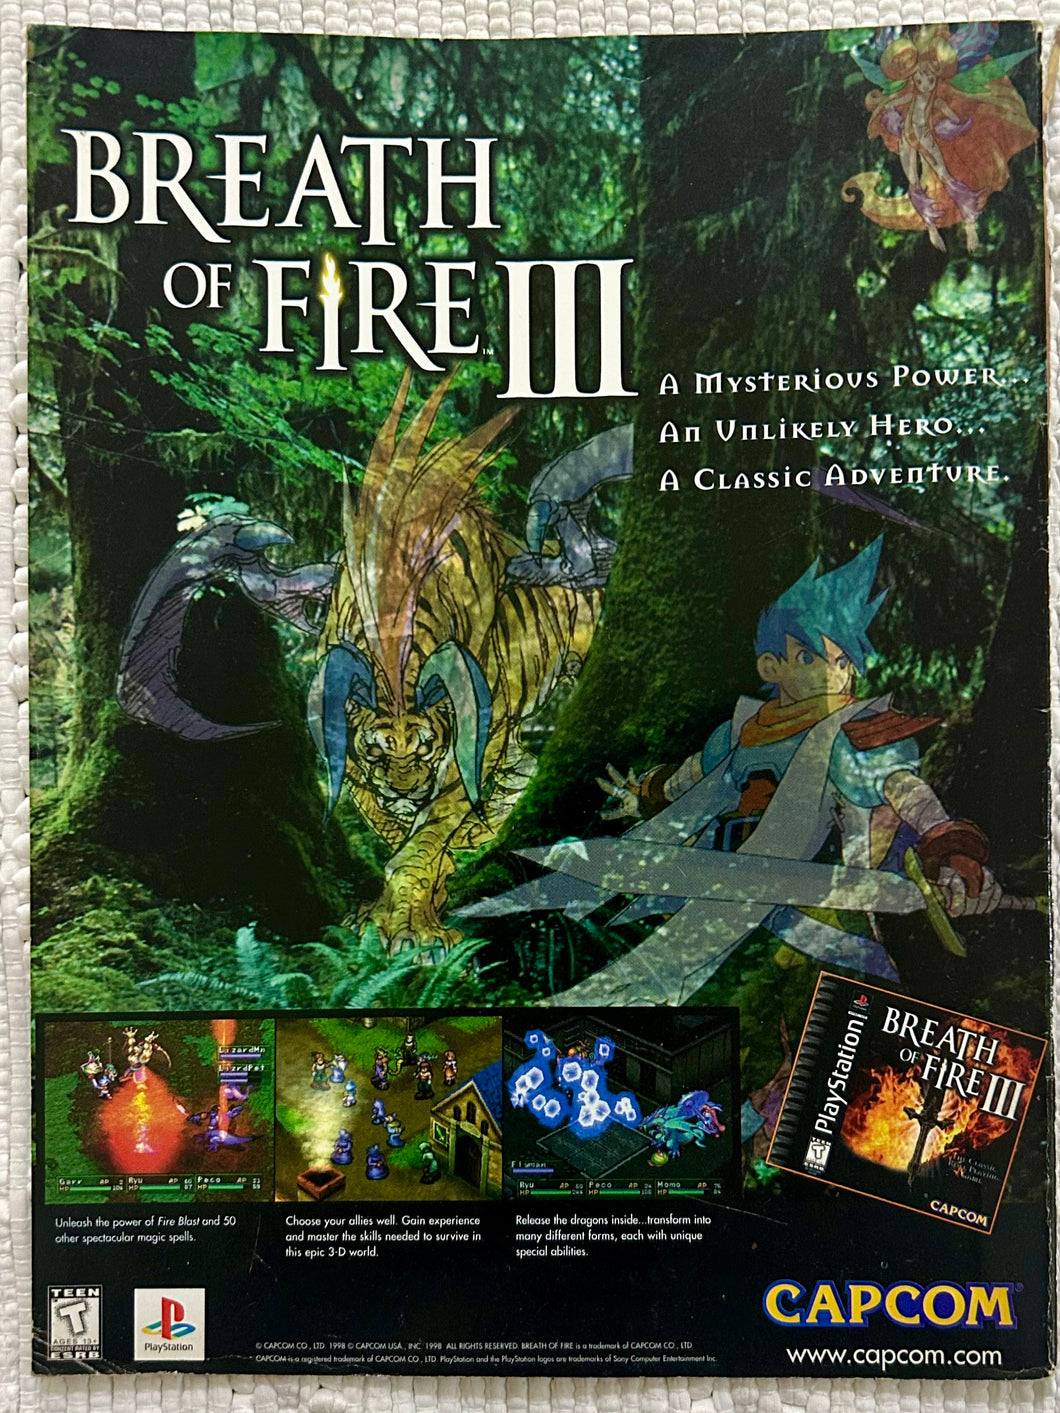 Breath of Fire III - PlayStation - Original Vintage Advertisement - Print Ads - Laminated A4 Poster